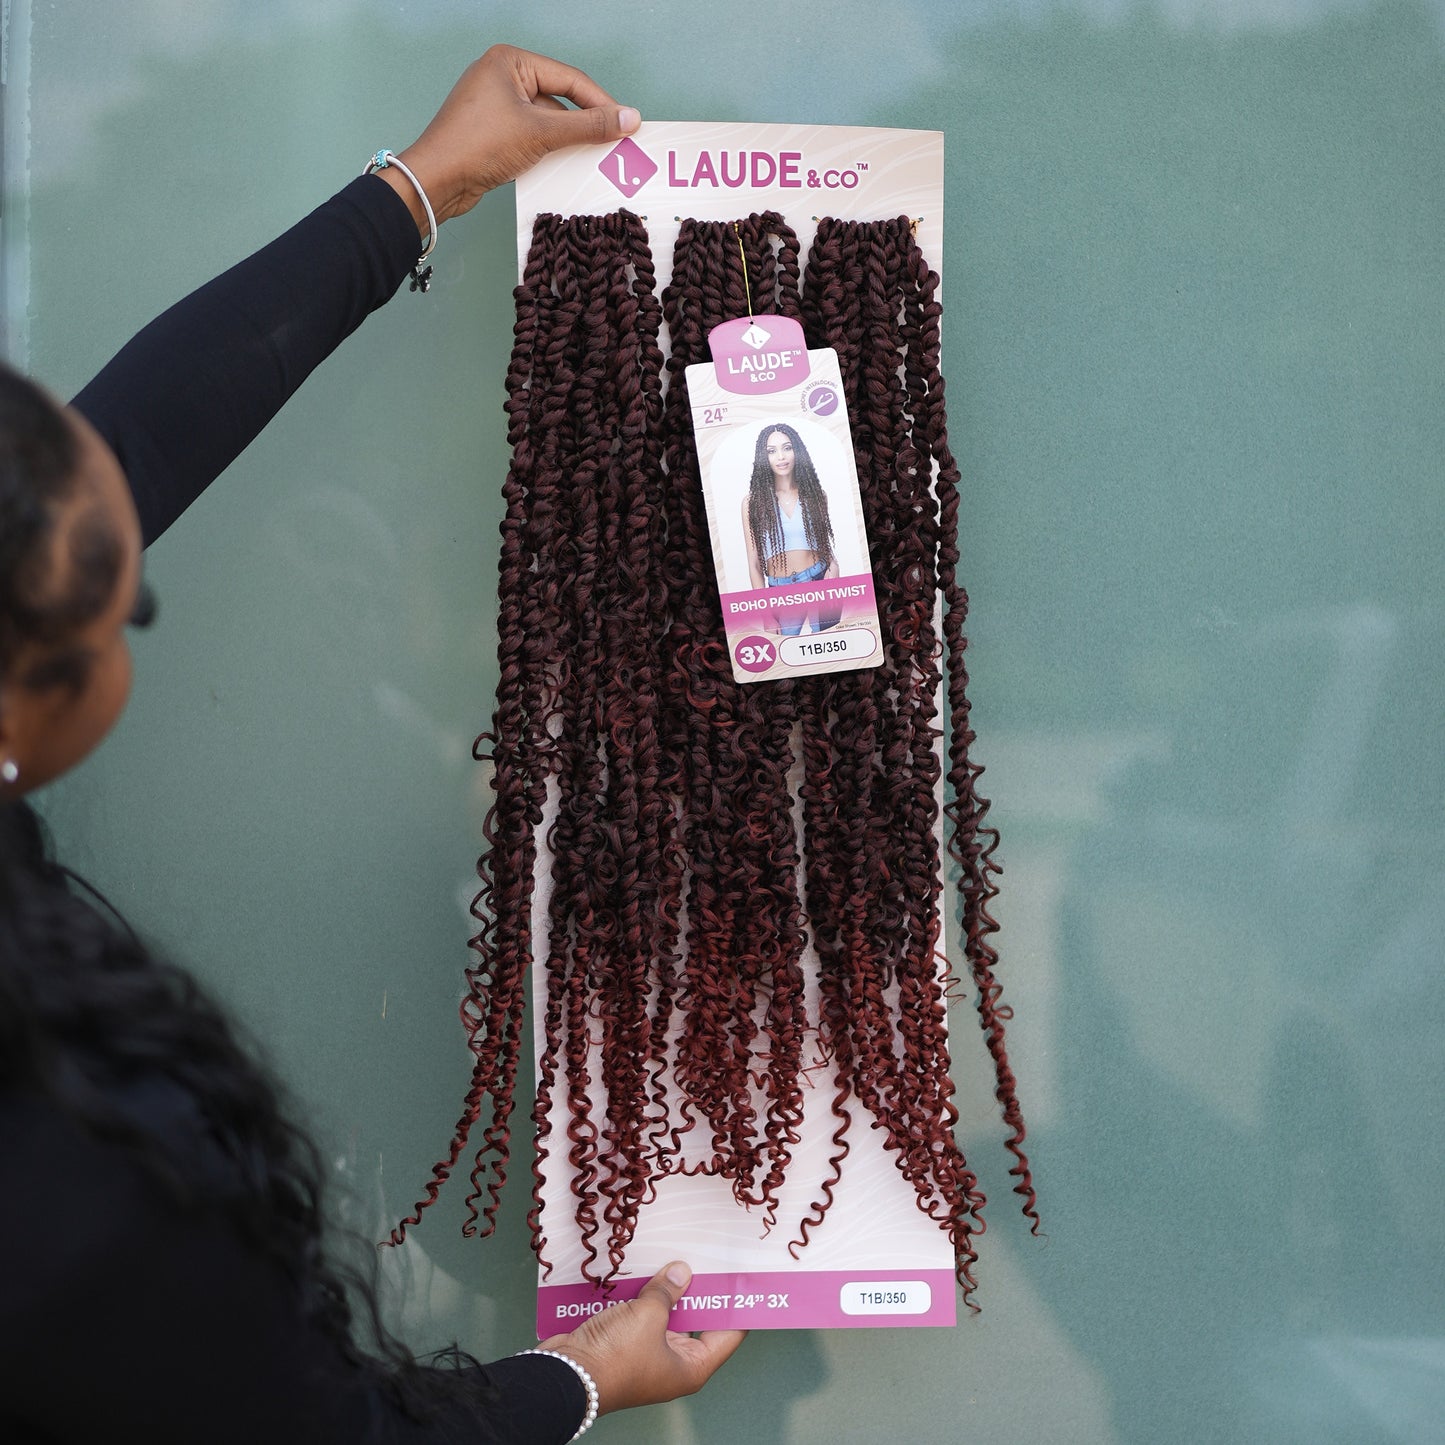 Laude Boho Style Passion Twists for Crocheting Hair, Easy to Use! [30 Strands in a Pack]